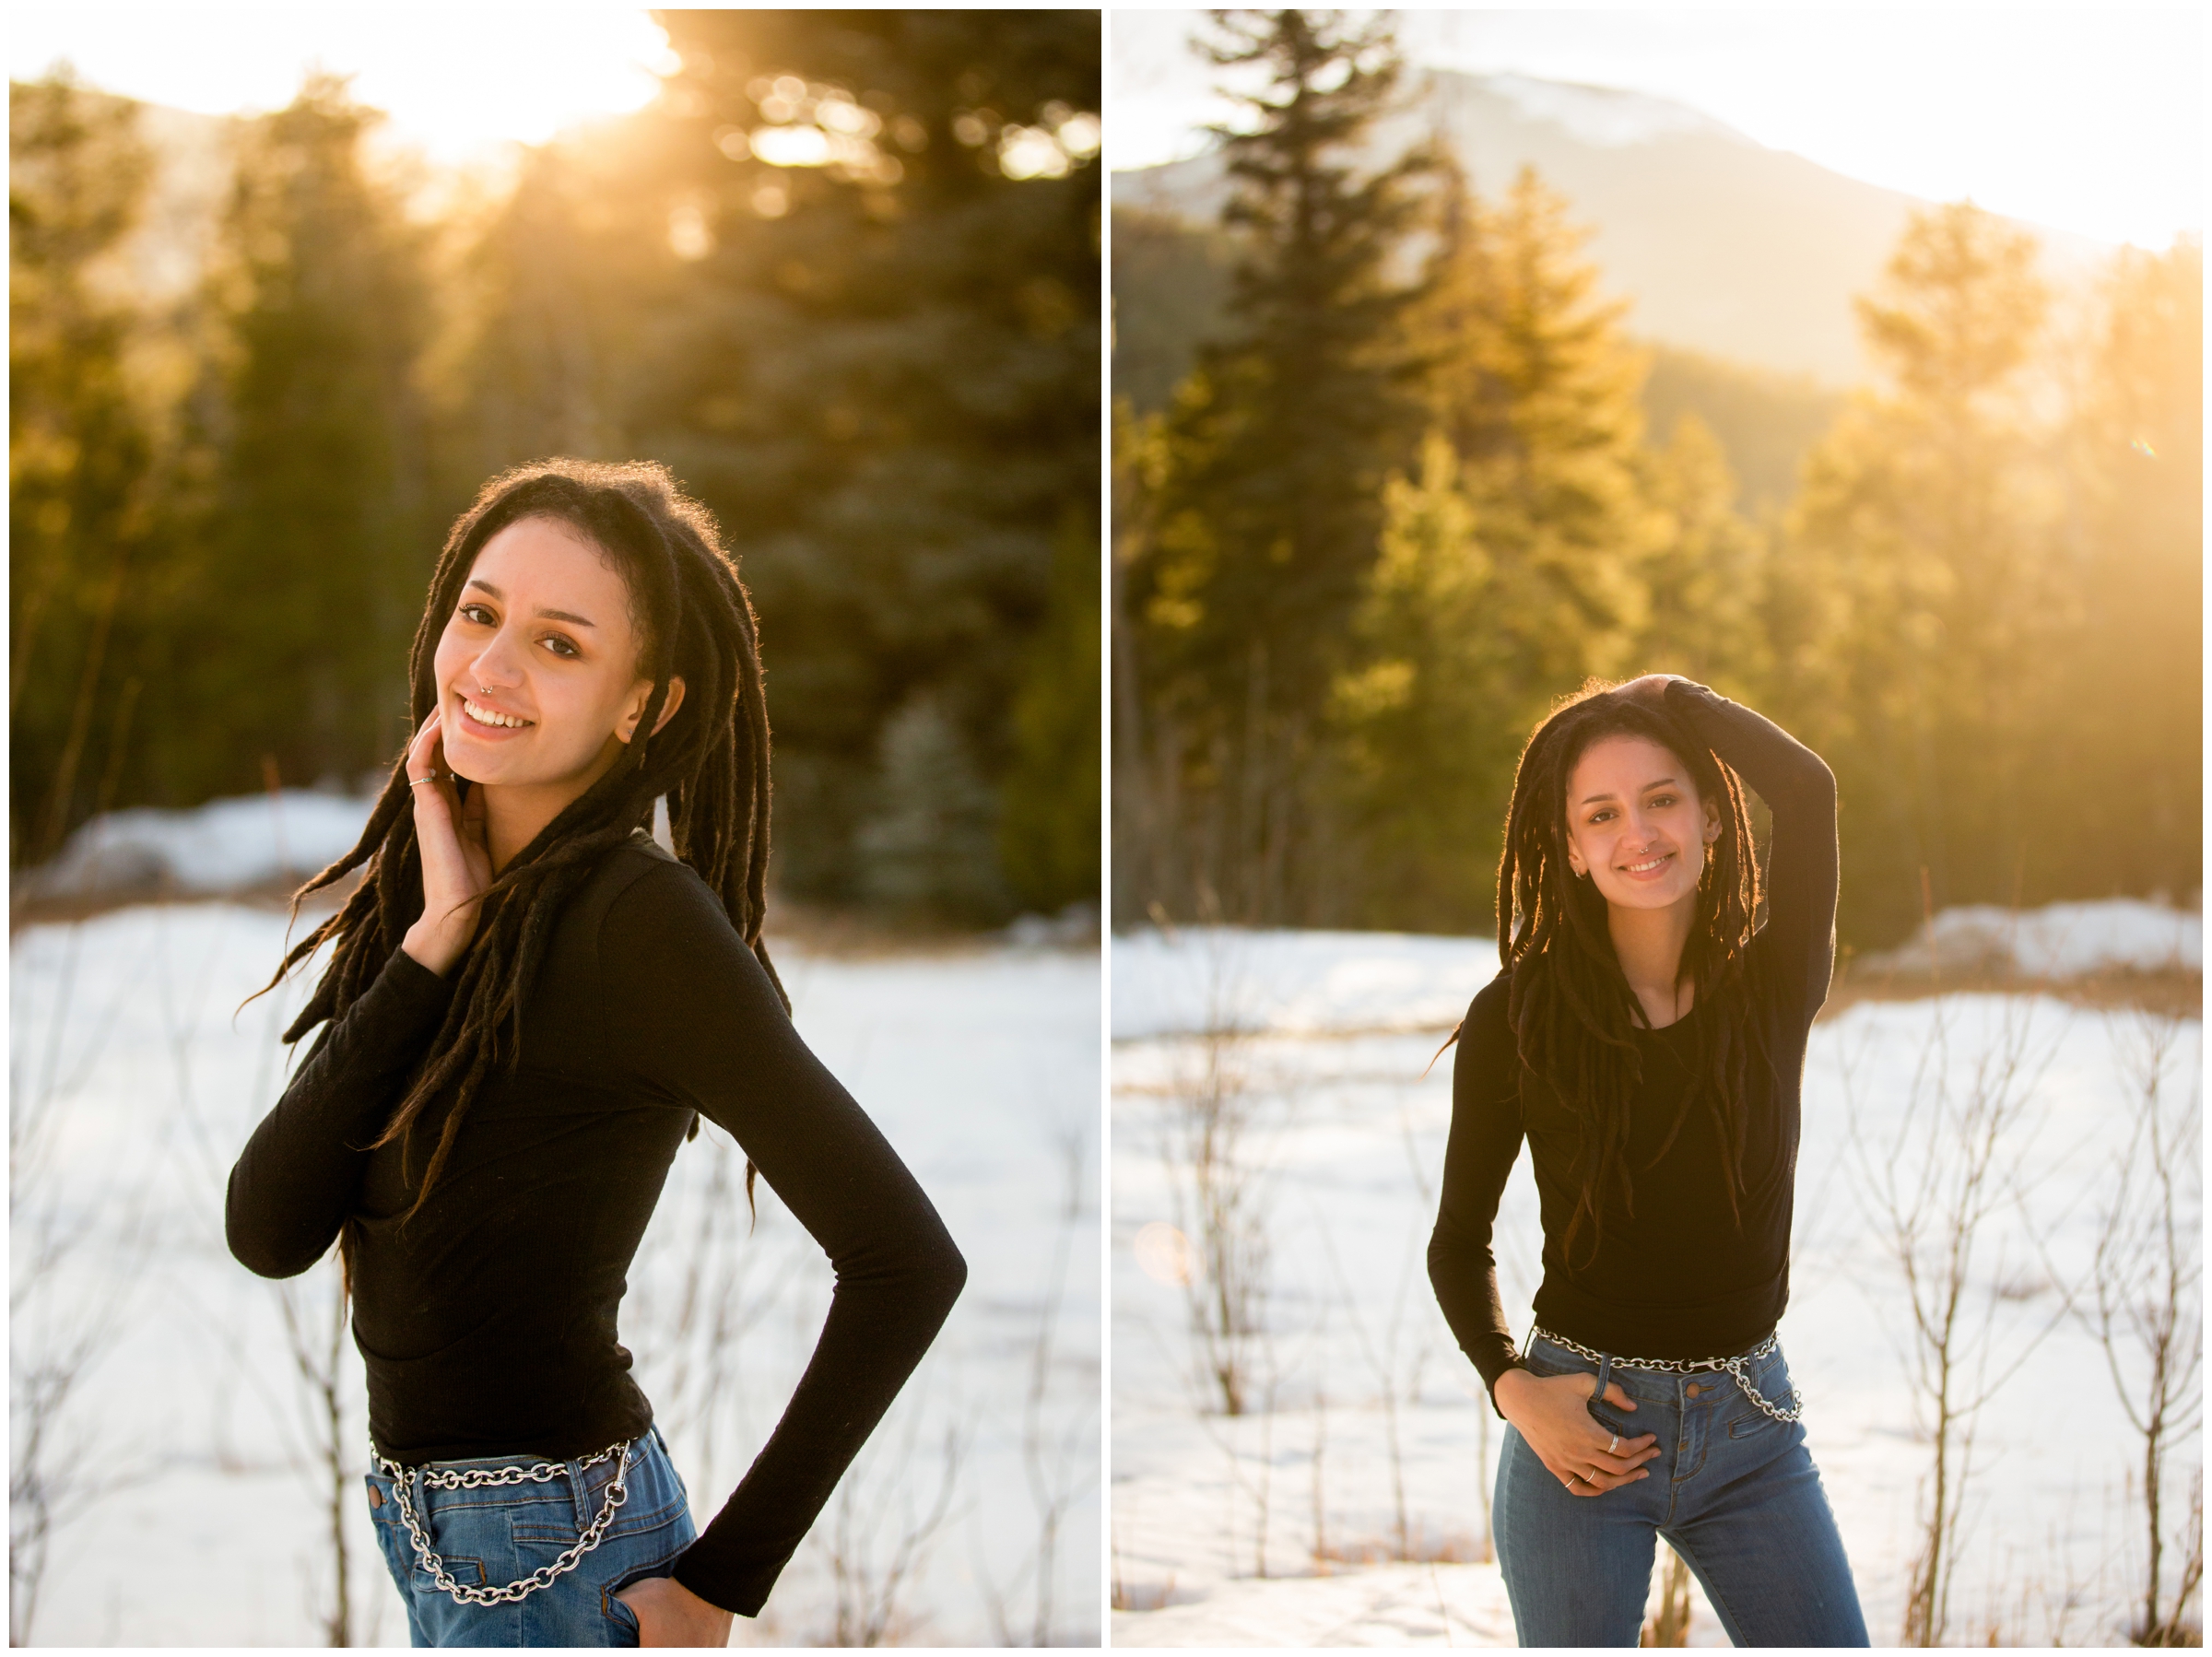 Sunny and snowy senior photography inspiration in the Colorado mountains 